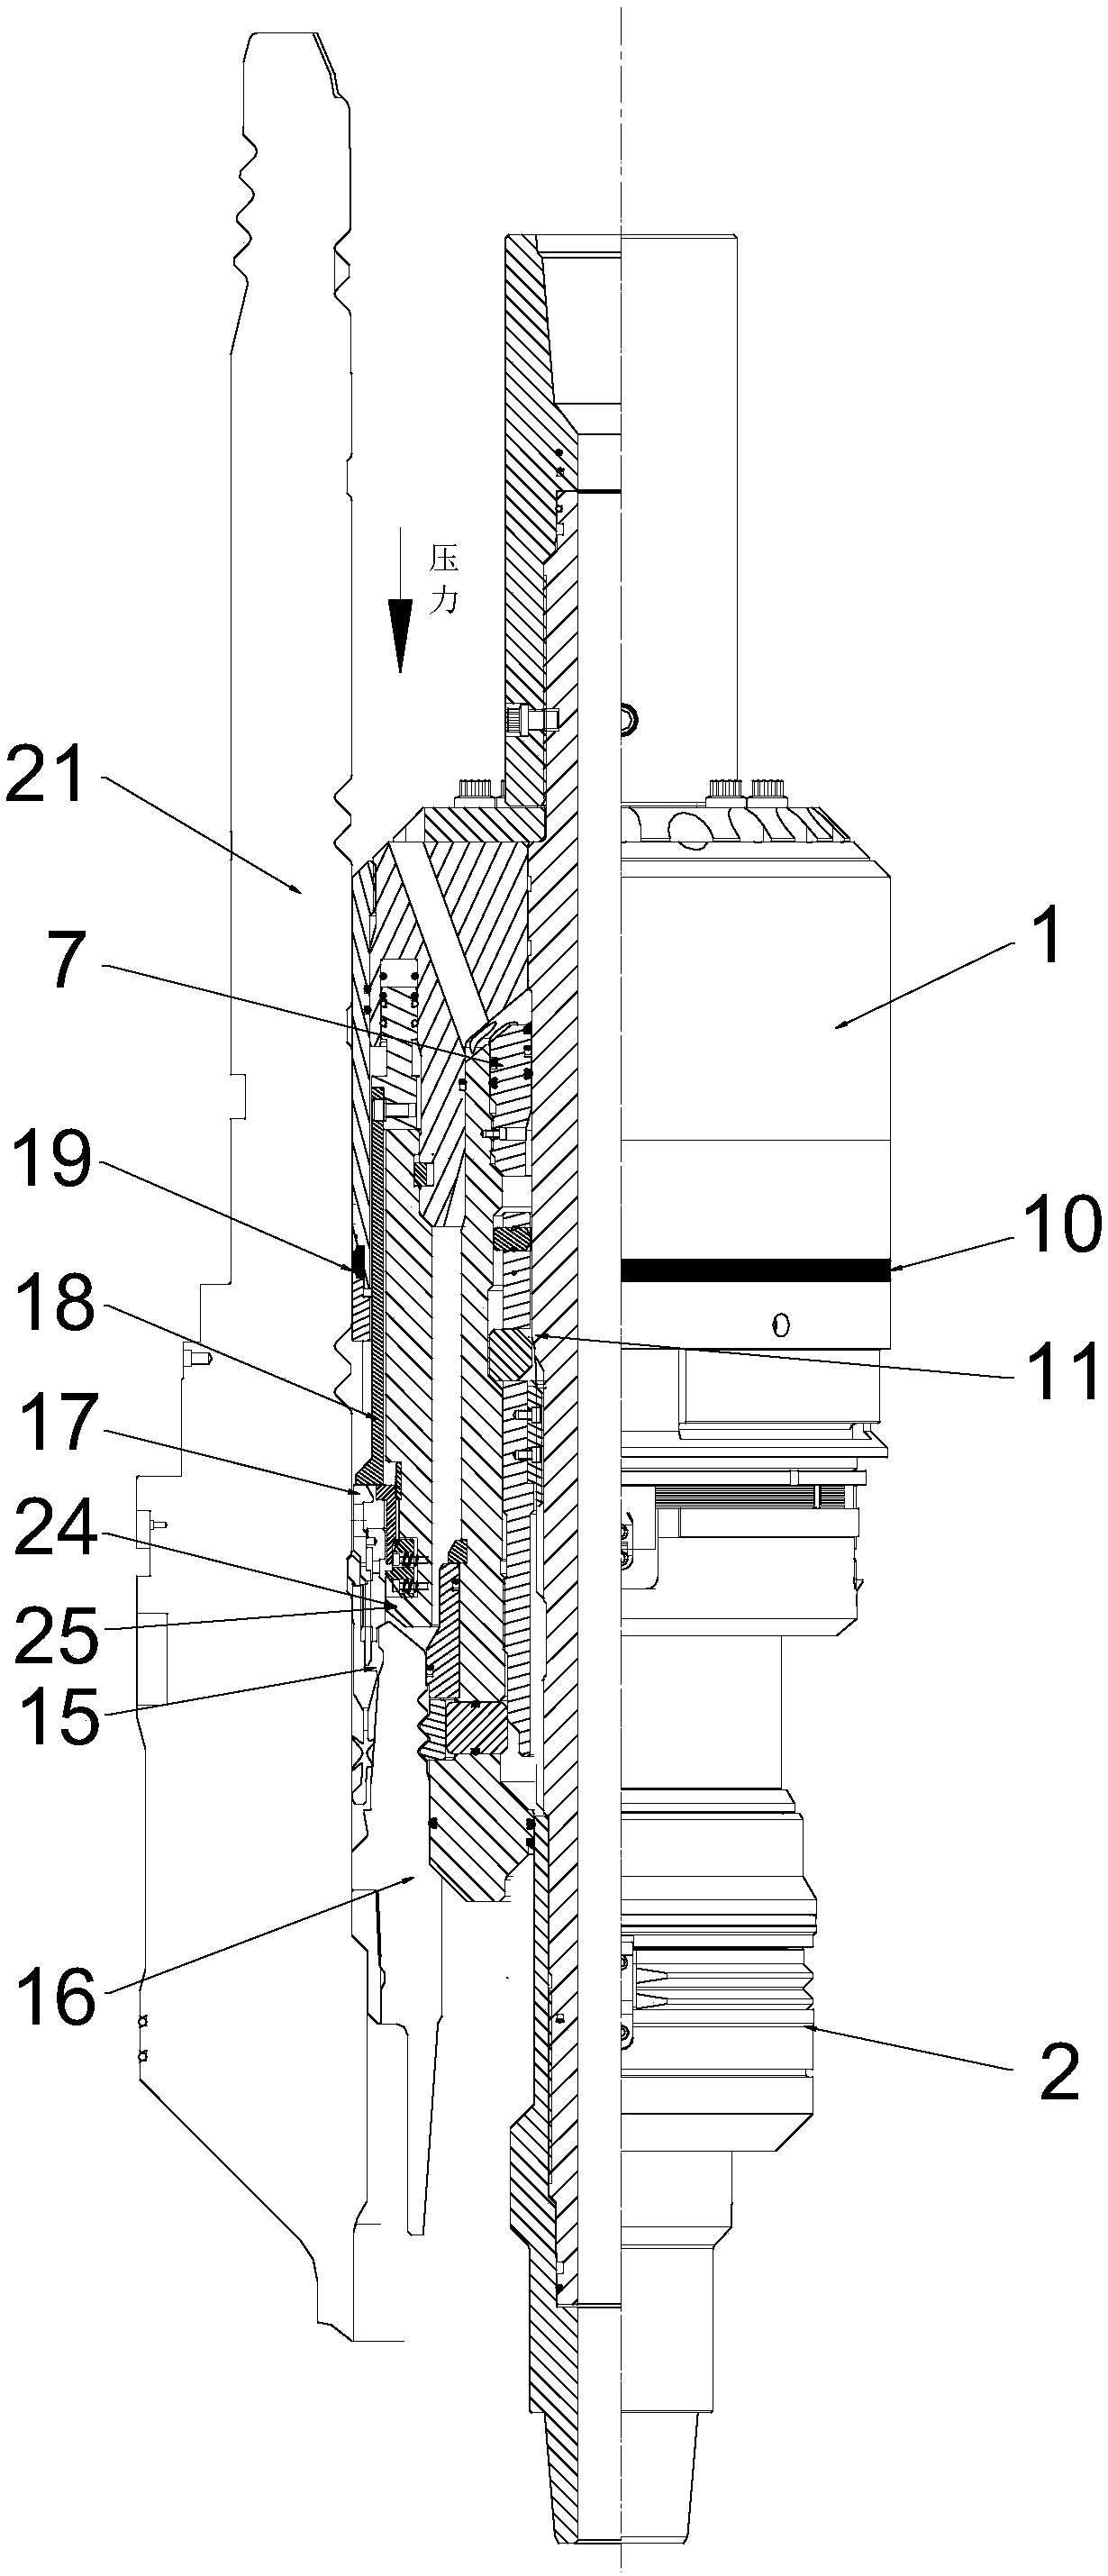 Single-pass running tool and method for casing hanger and sealing assembly for underwater wellhead